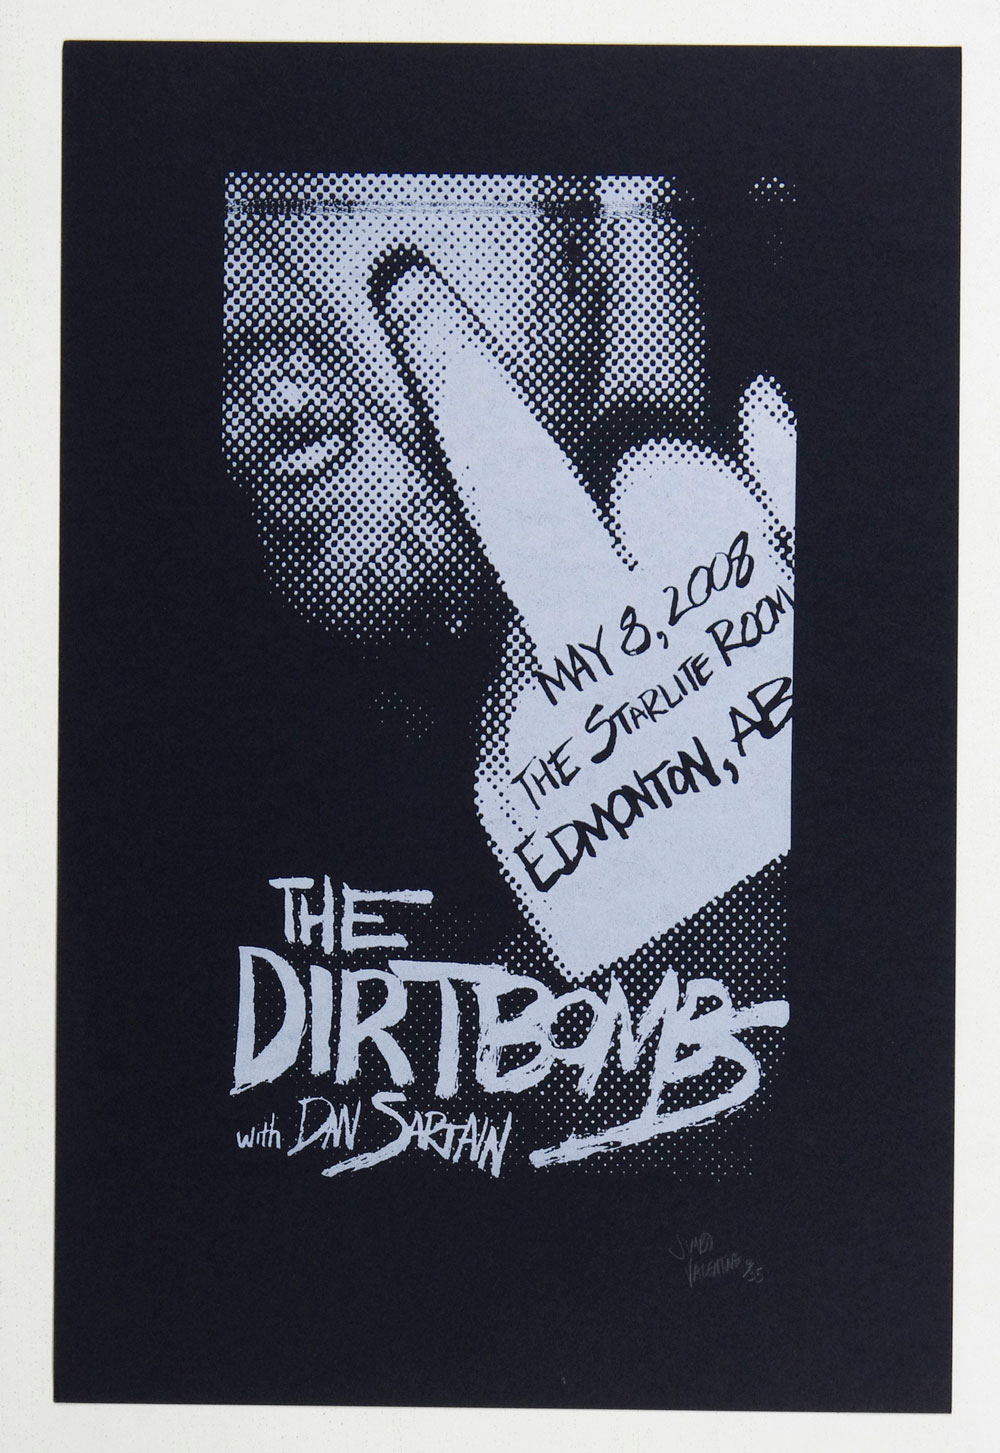 The Dirtbombs Poster 2008 May 8 Edmonton Canada J Valentine Signed Numberd 